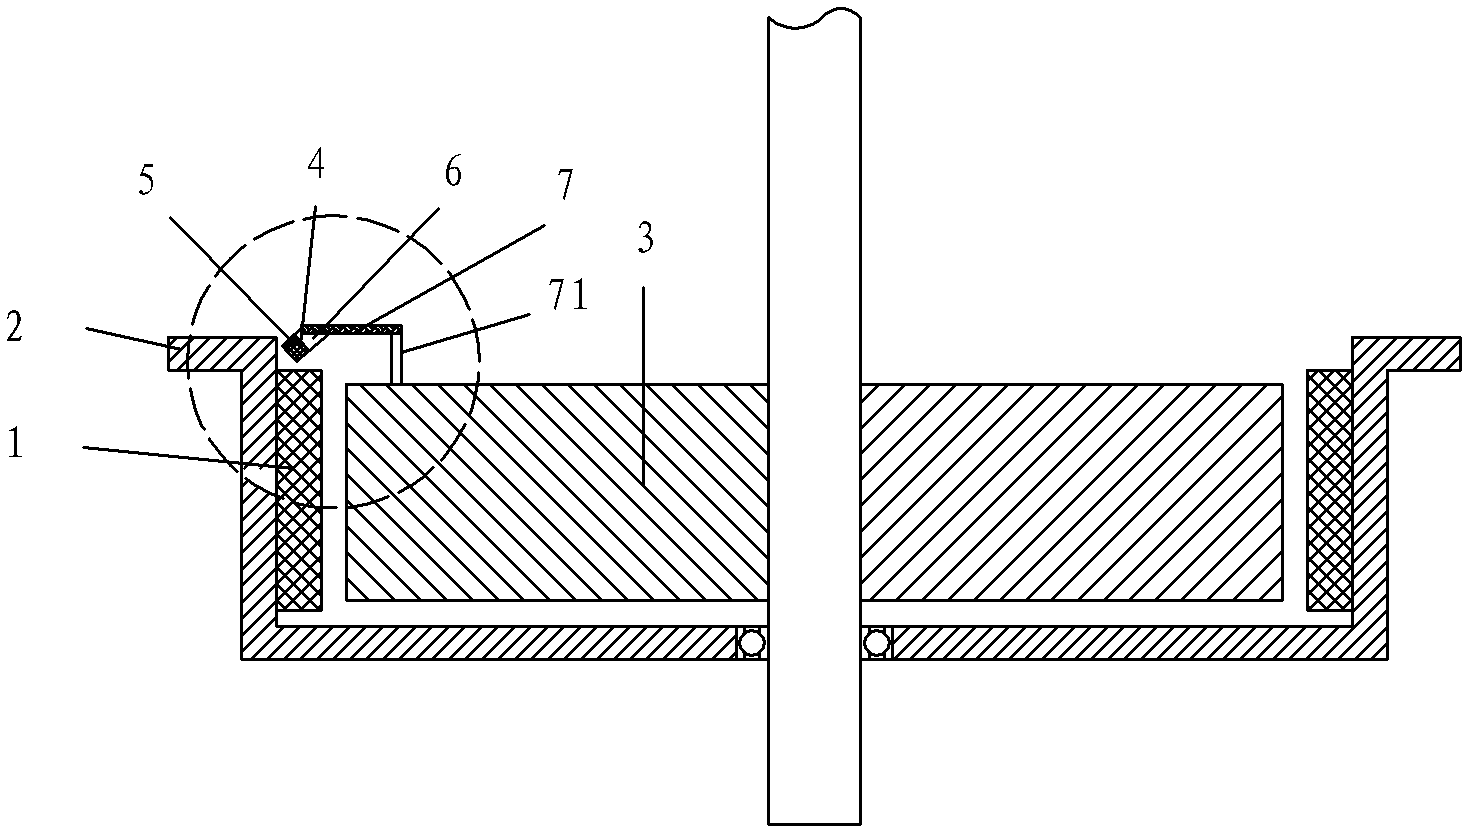 Rotor position detection device for permanent magnet motor